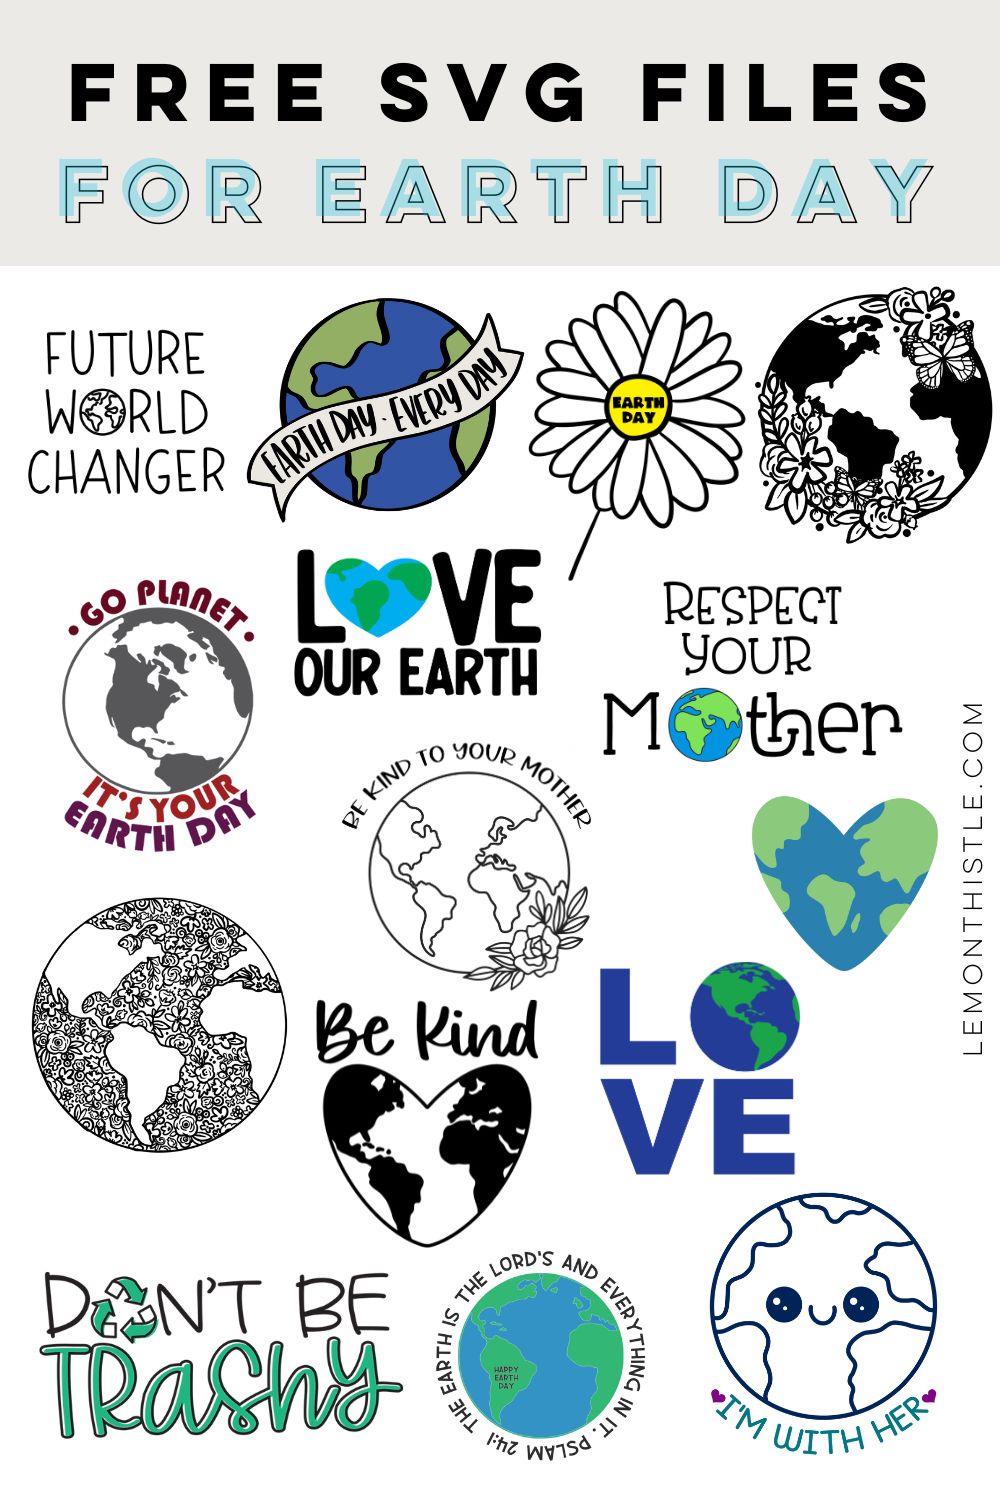 15 Free Earth Day Cut Files- designs on white background with title text